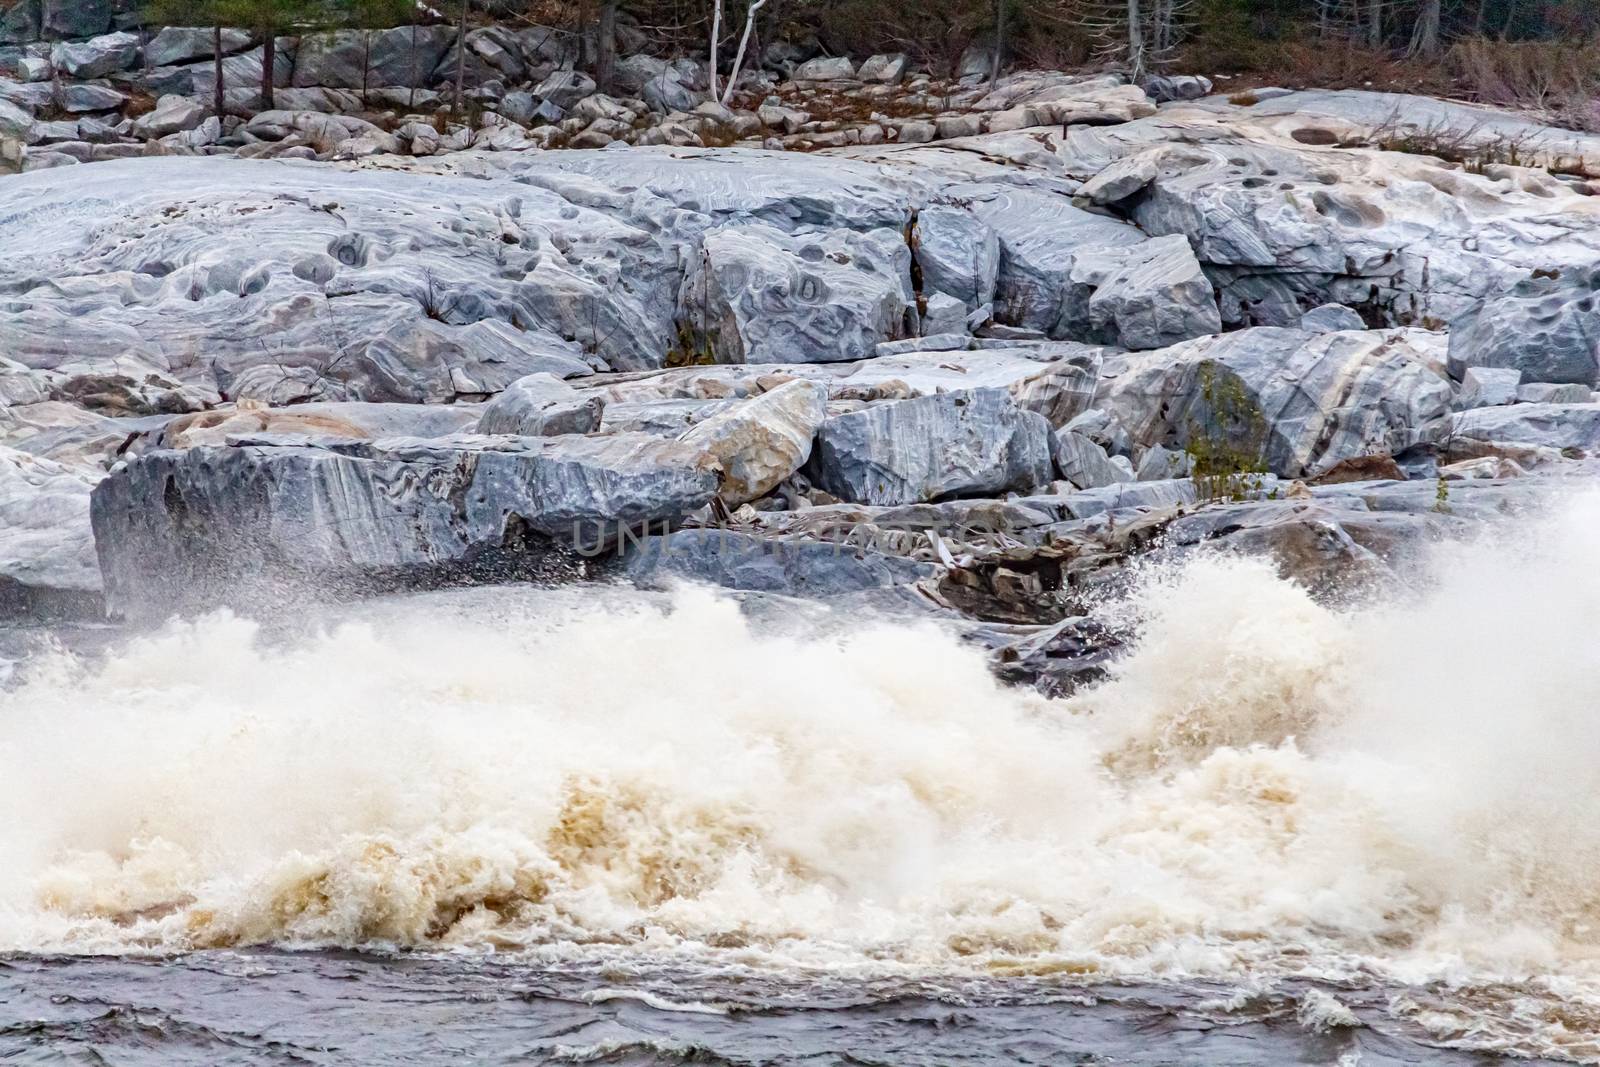 Rushing Whitewater Crashing into a River by Rocks by colintemple